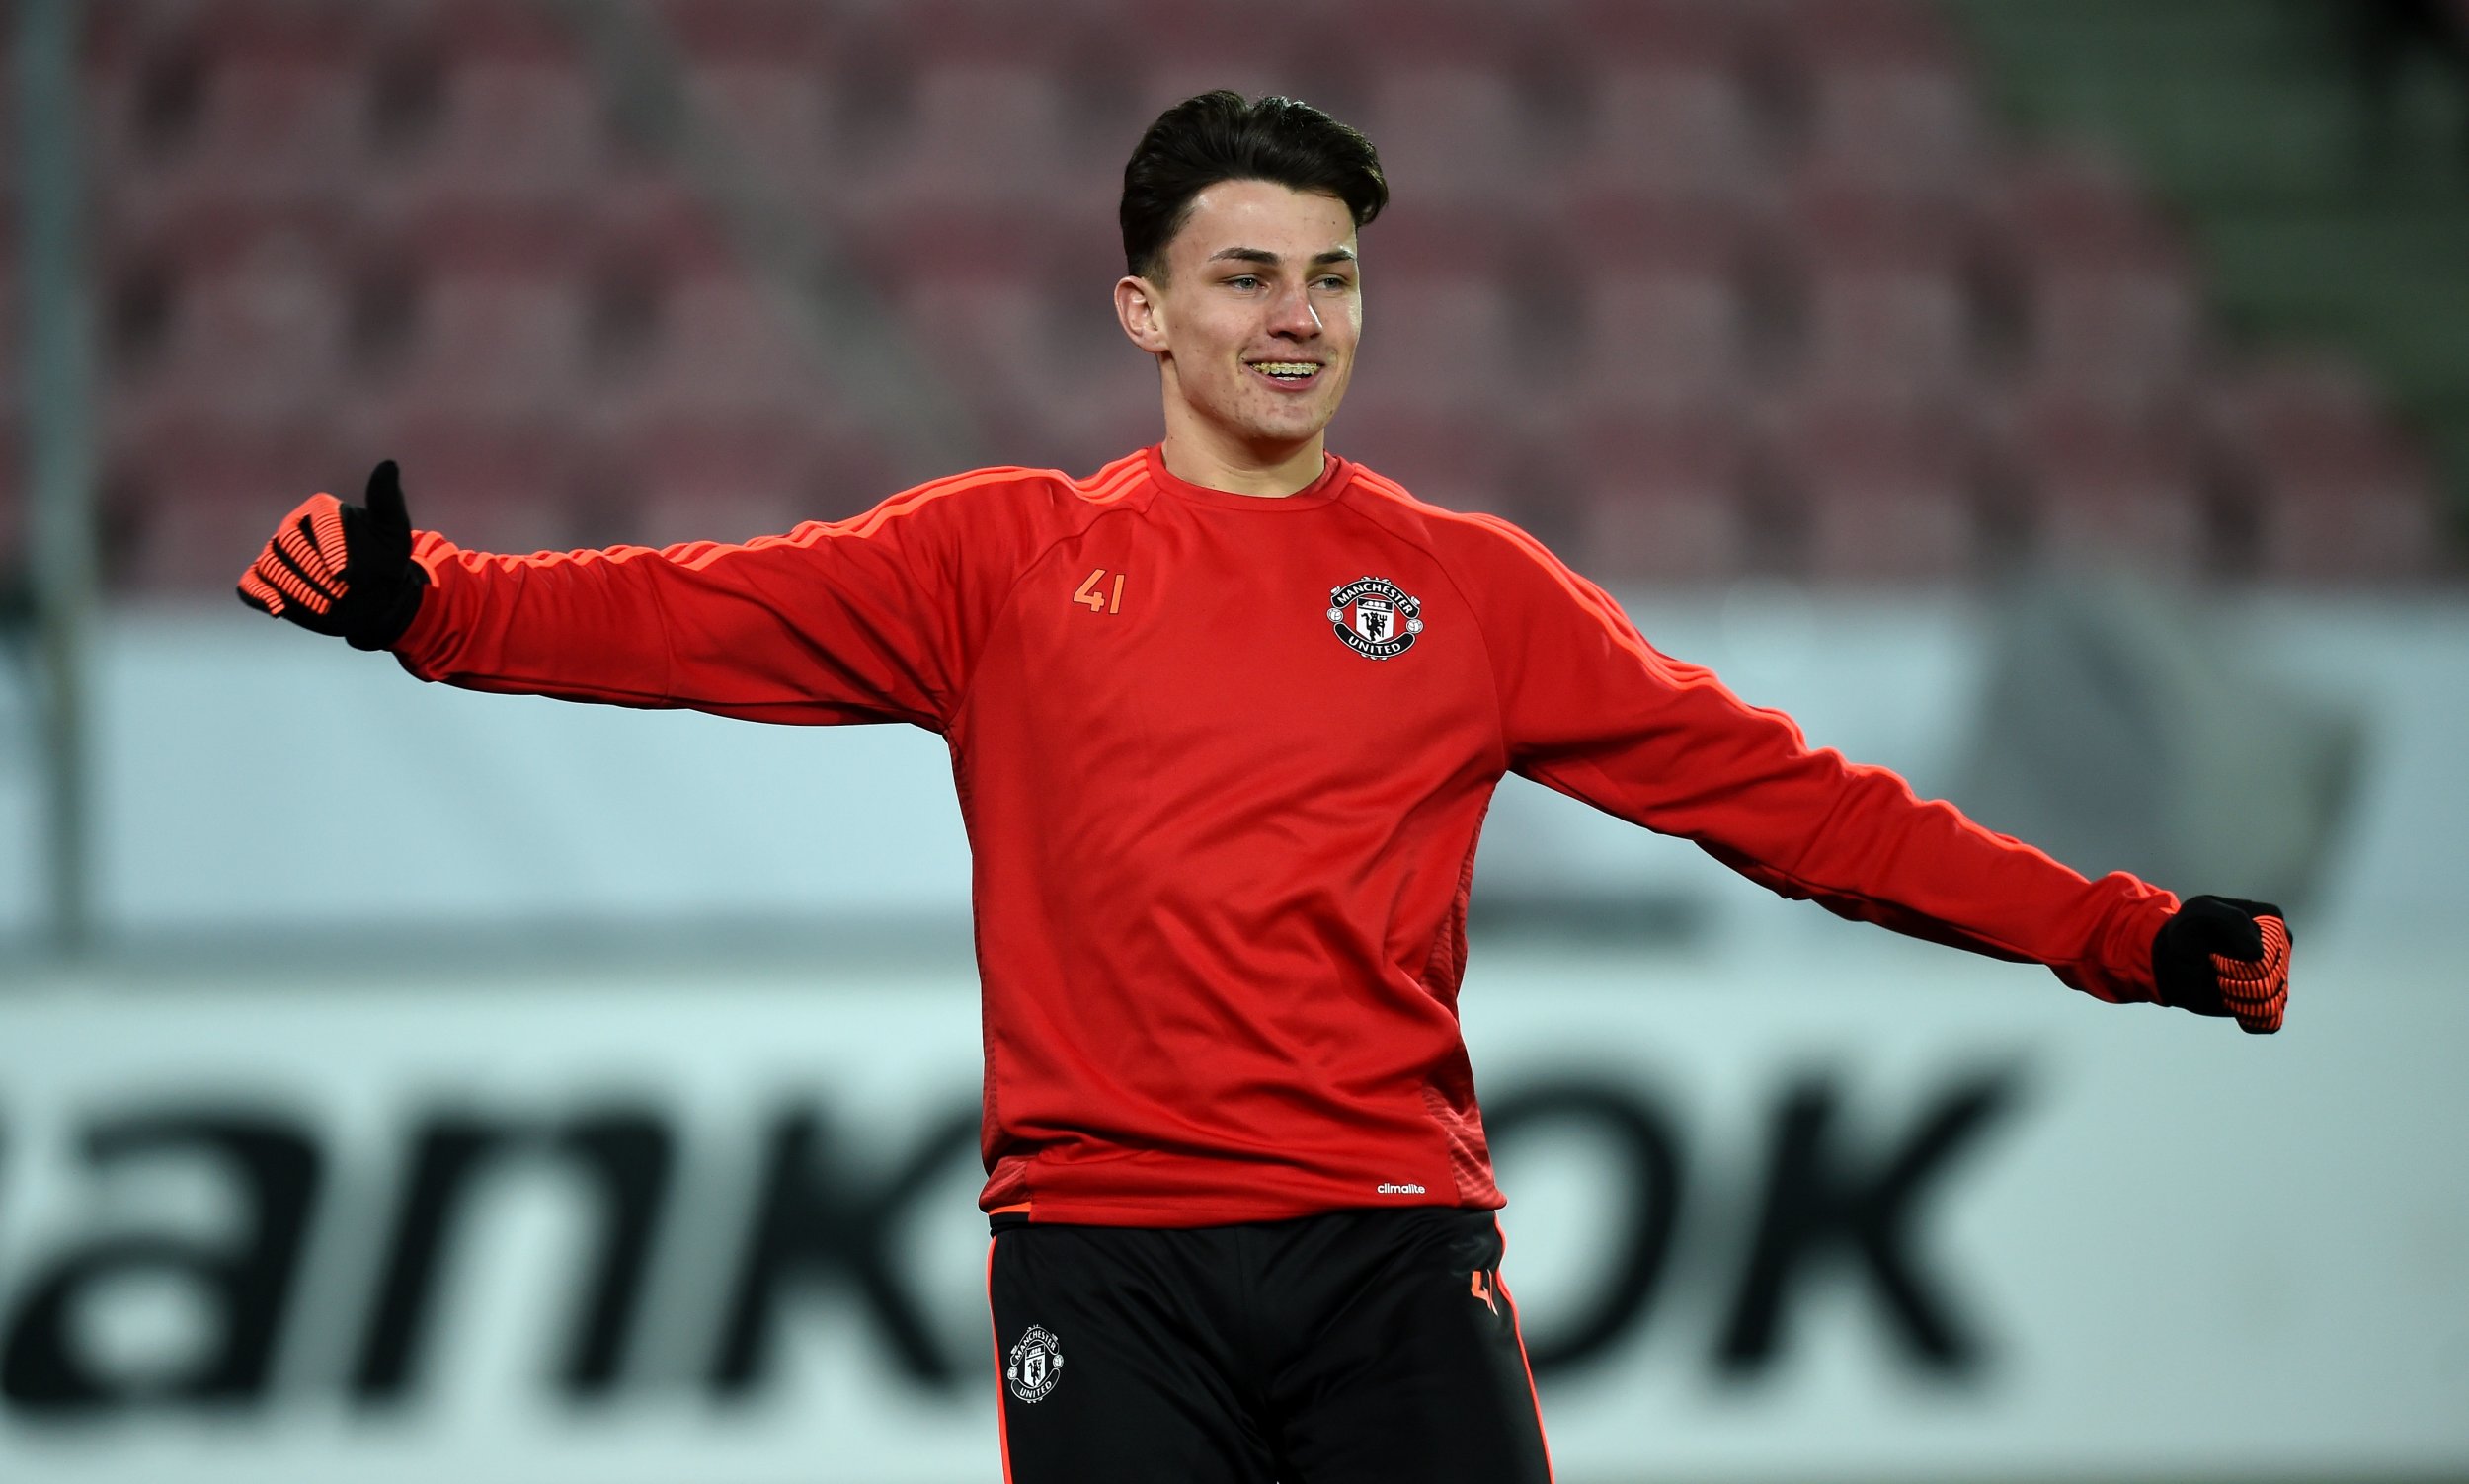 Regan Poole has one senior appearance for Manchester United.